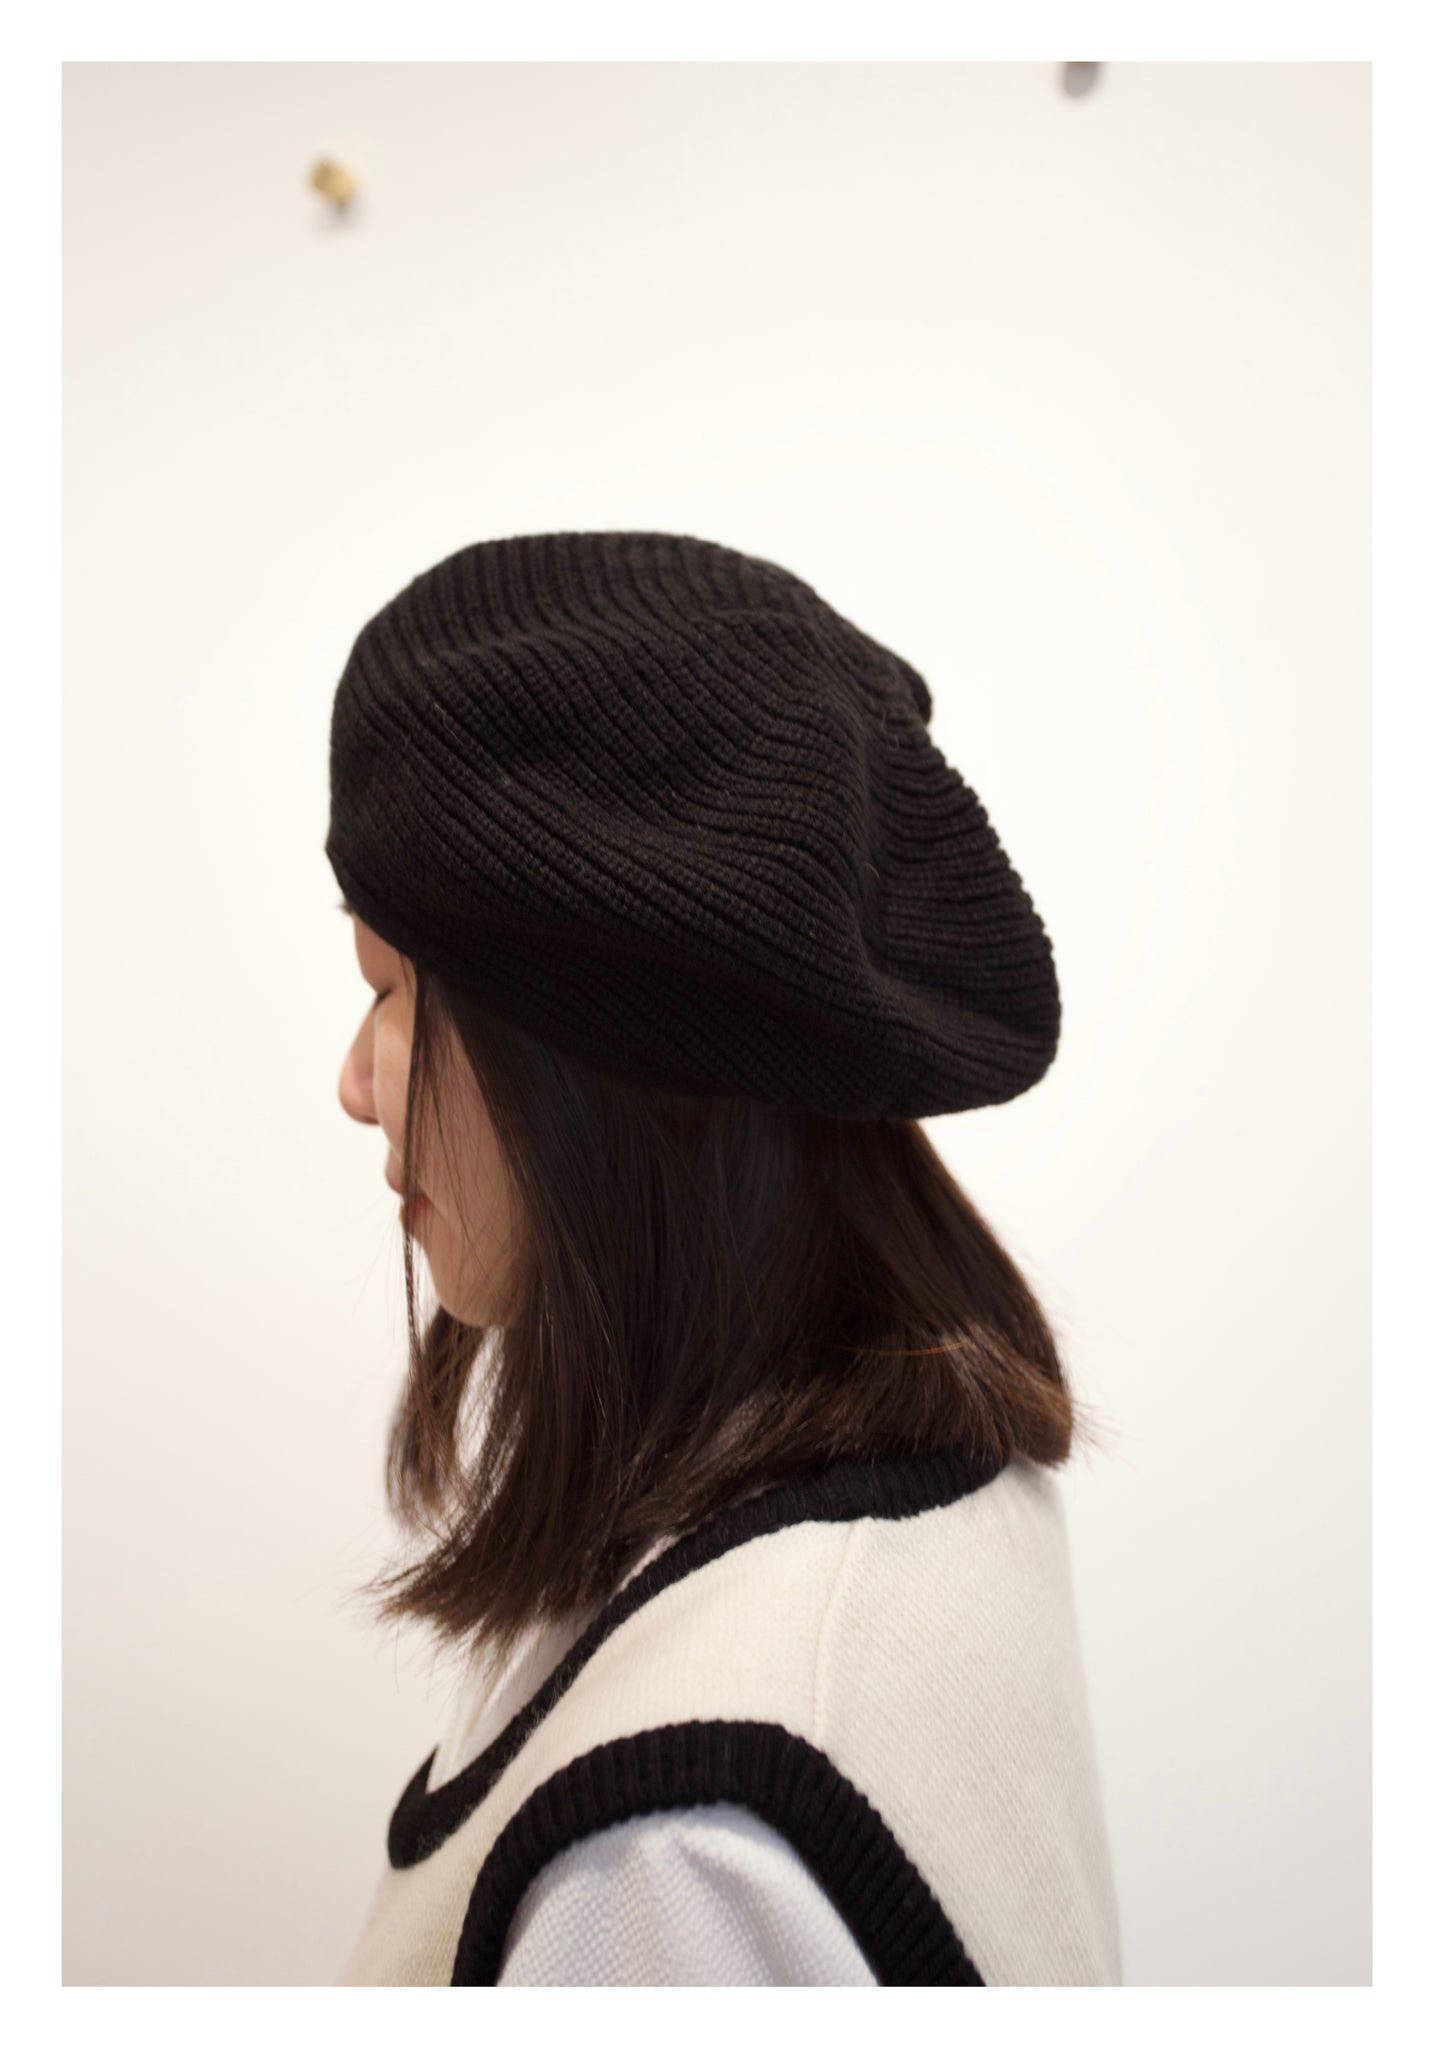 Knitted Beret Black - whoami